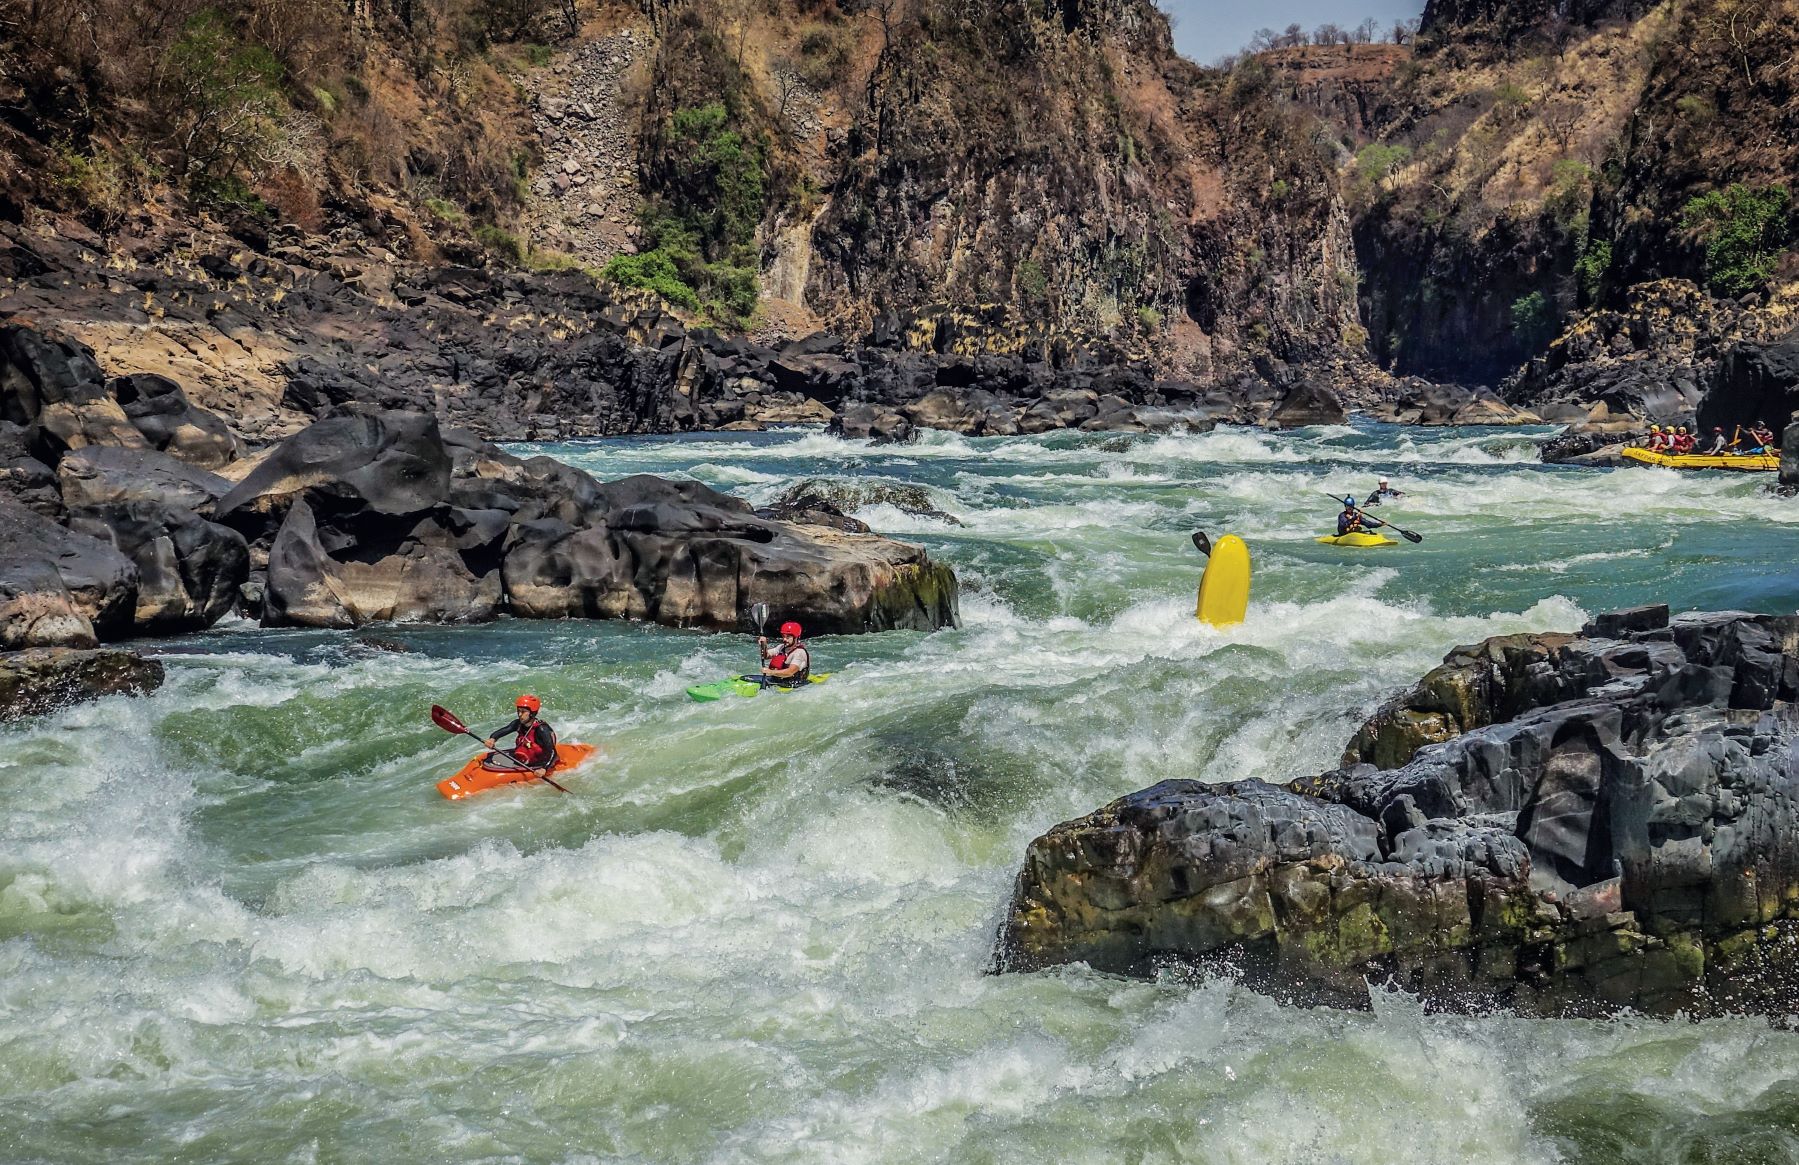 Group of kayakers paddling the big whitewater rapids on the Zambezi River, with one kayak tip high up, and a group of people in a raft upriver.